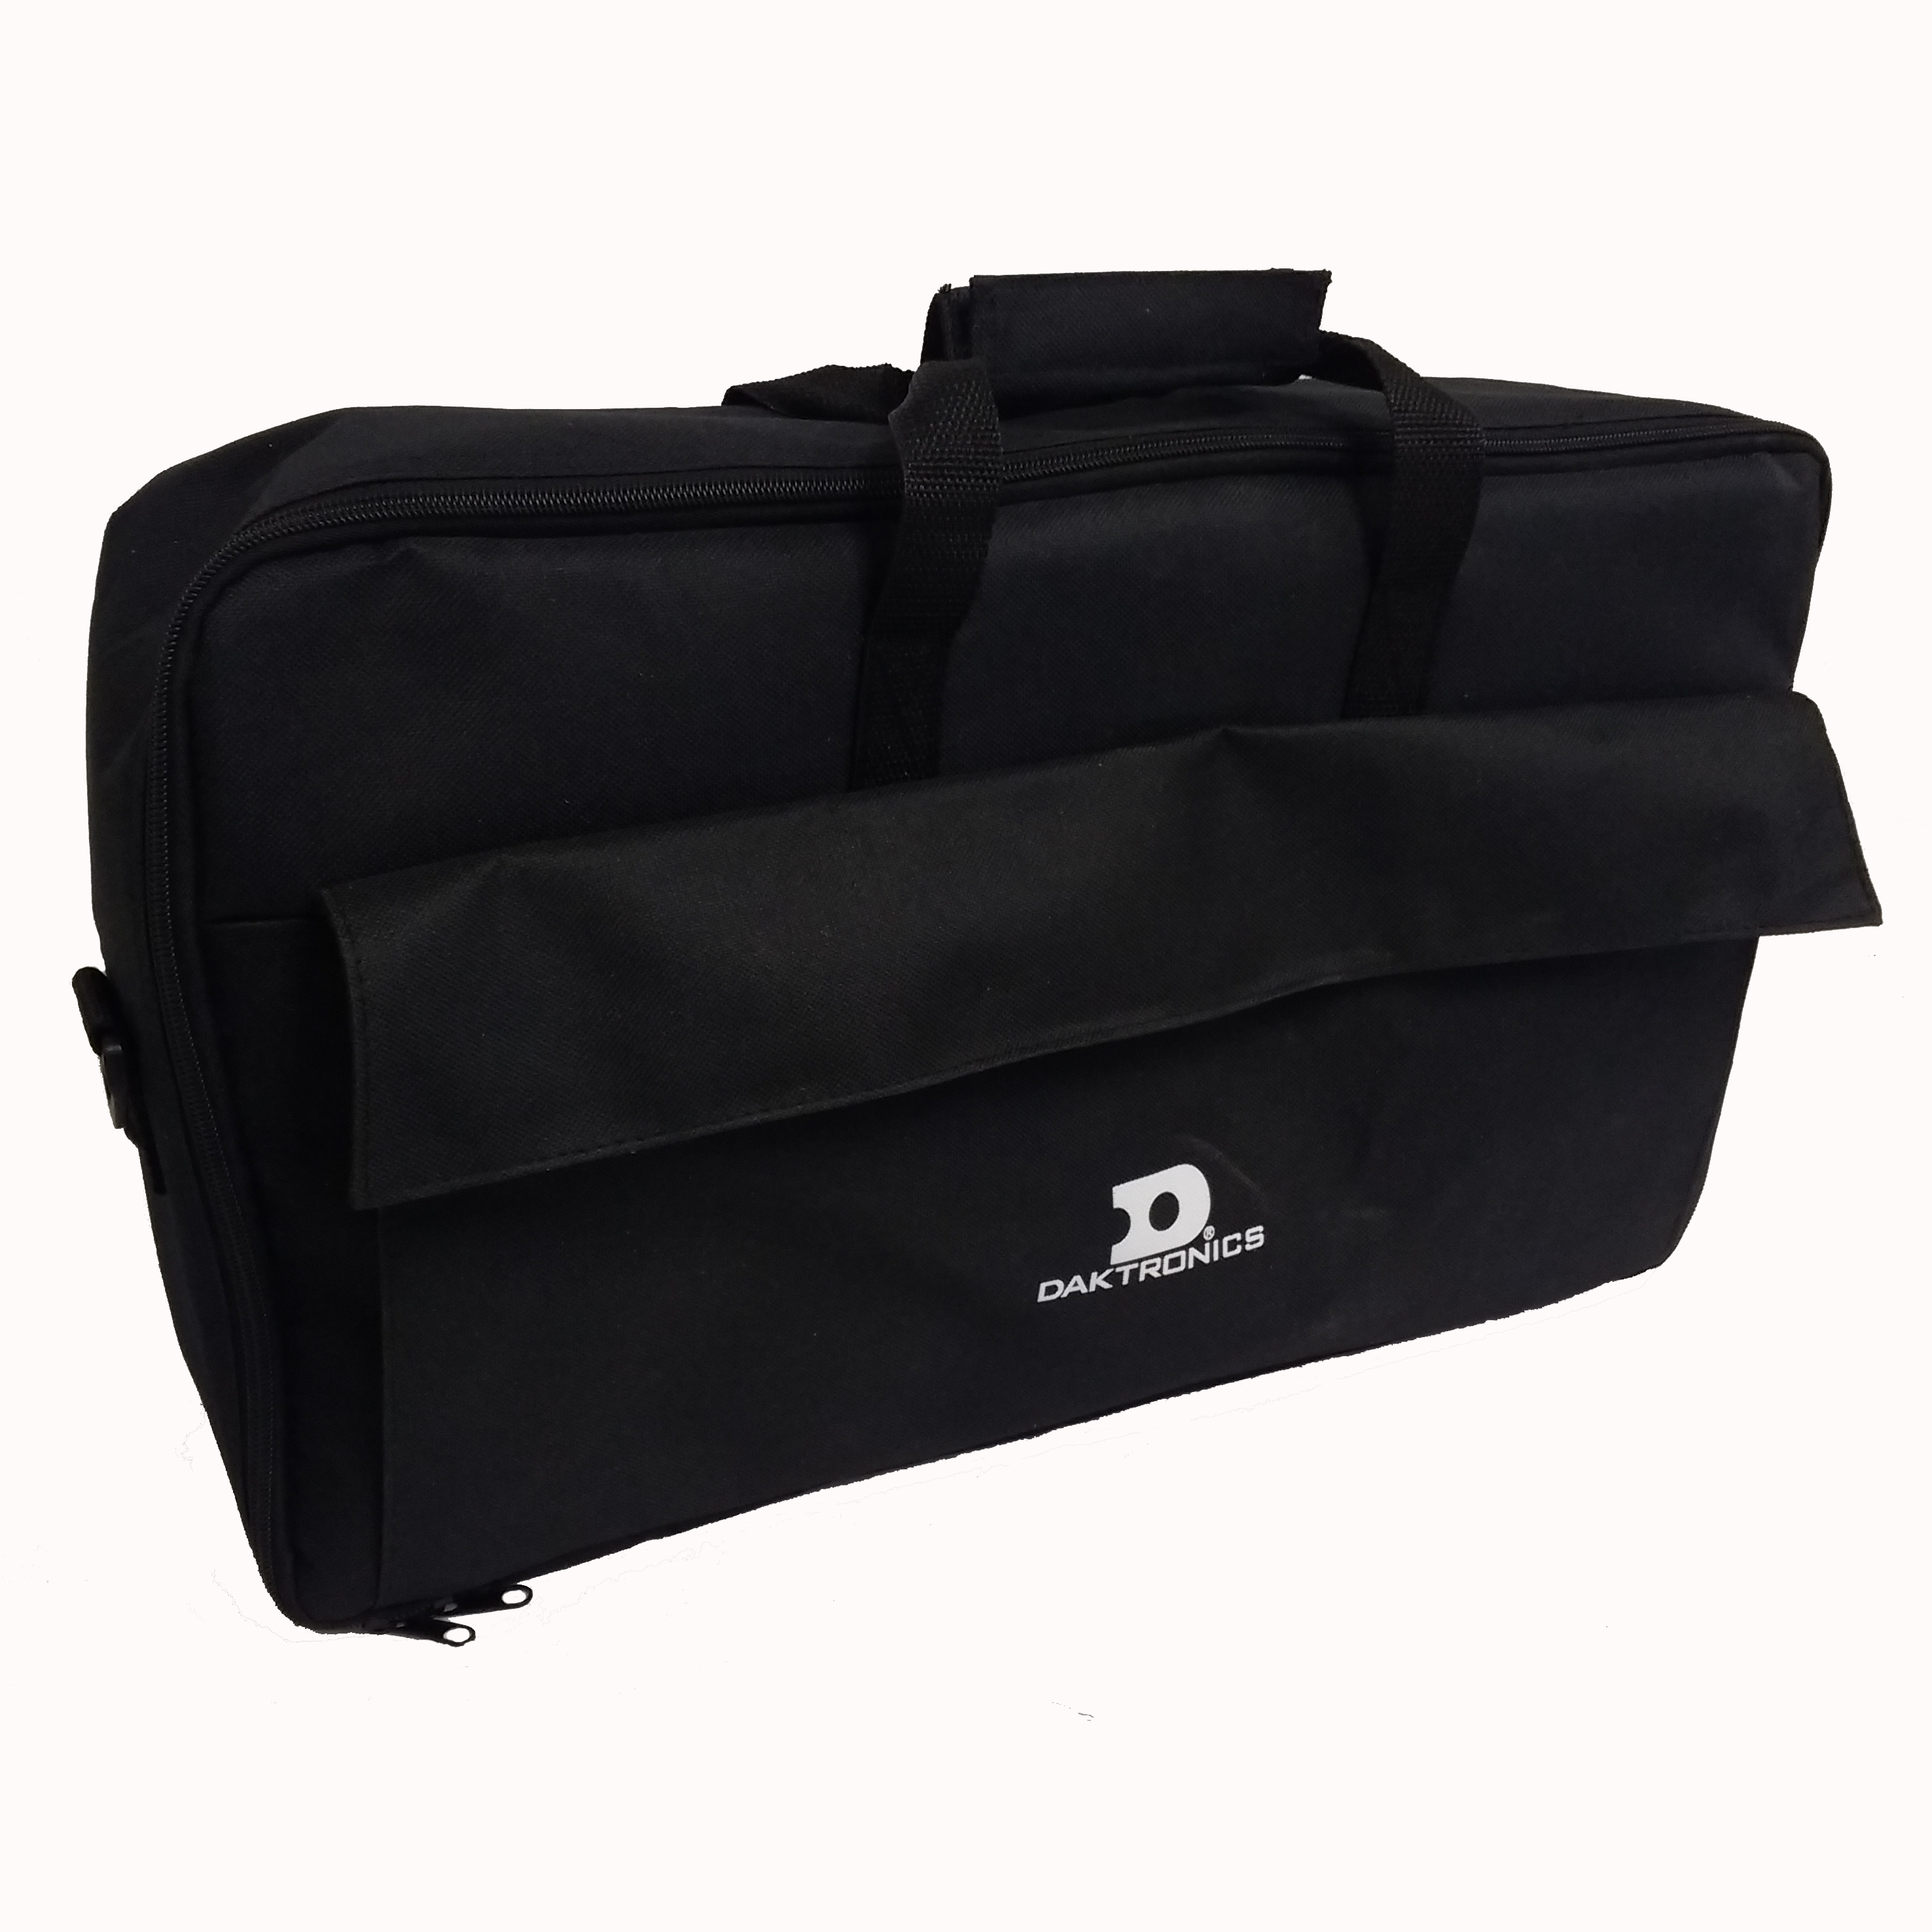 (EN-1817) Daktronics Soft Carrying Case for All Sport 3000, 4000, and 5000 Controllers